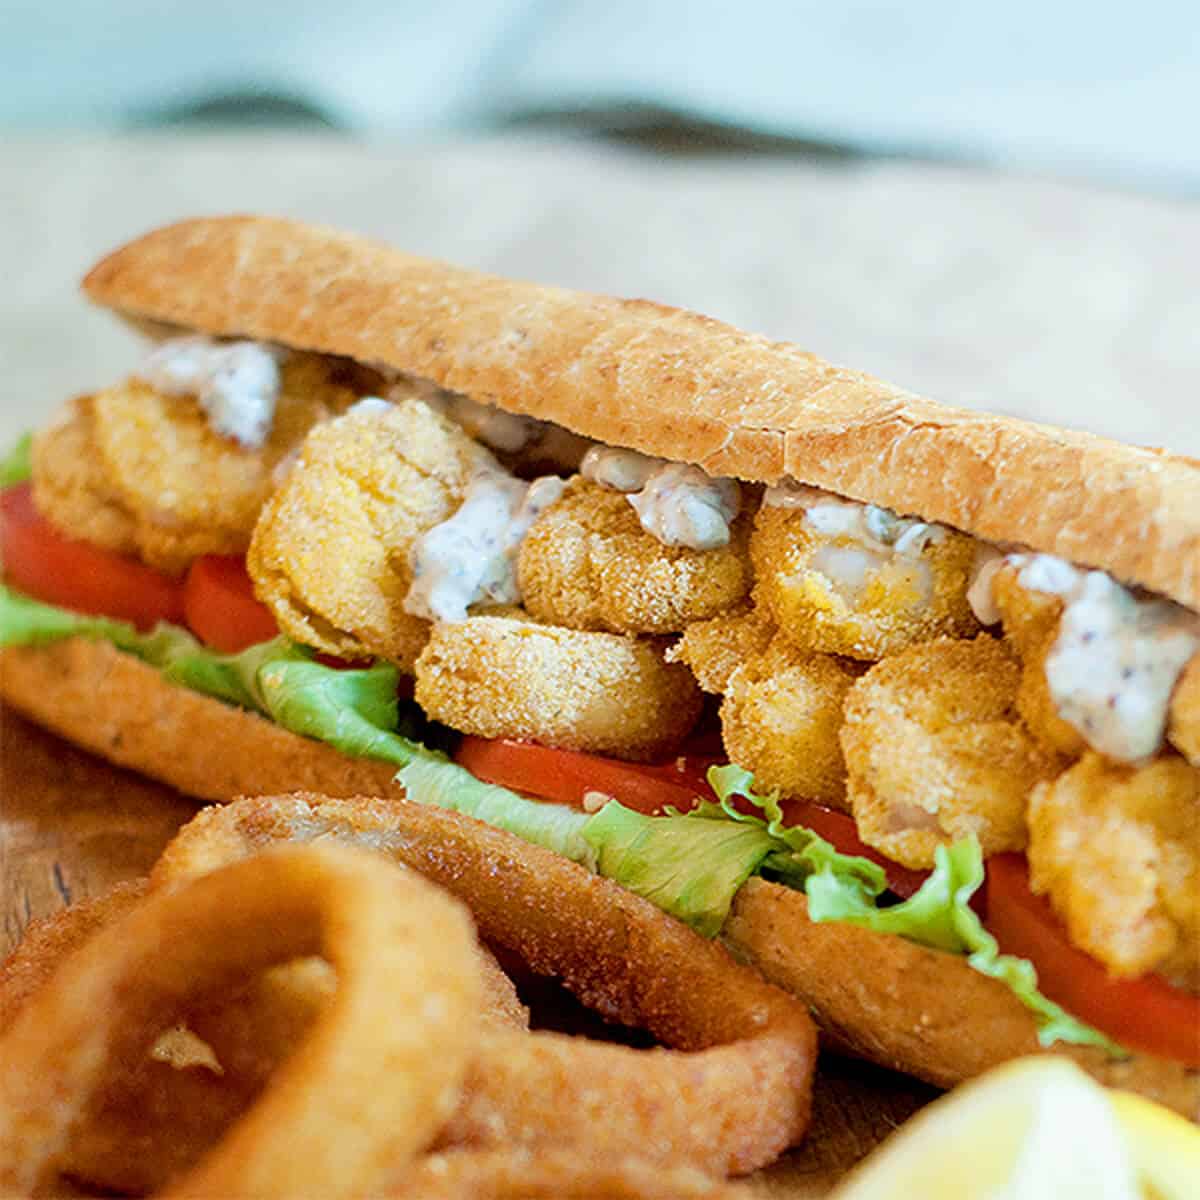 Shrimp Po' Boy with onion rings in the foreground.